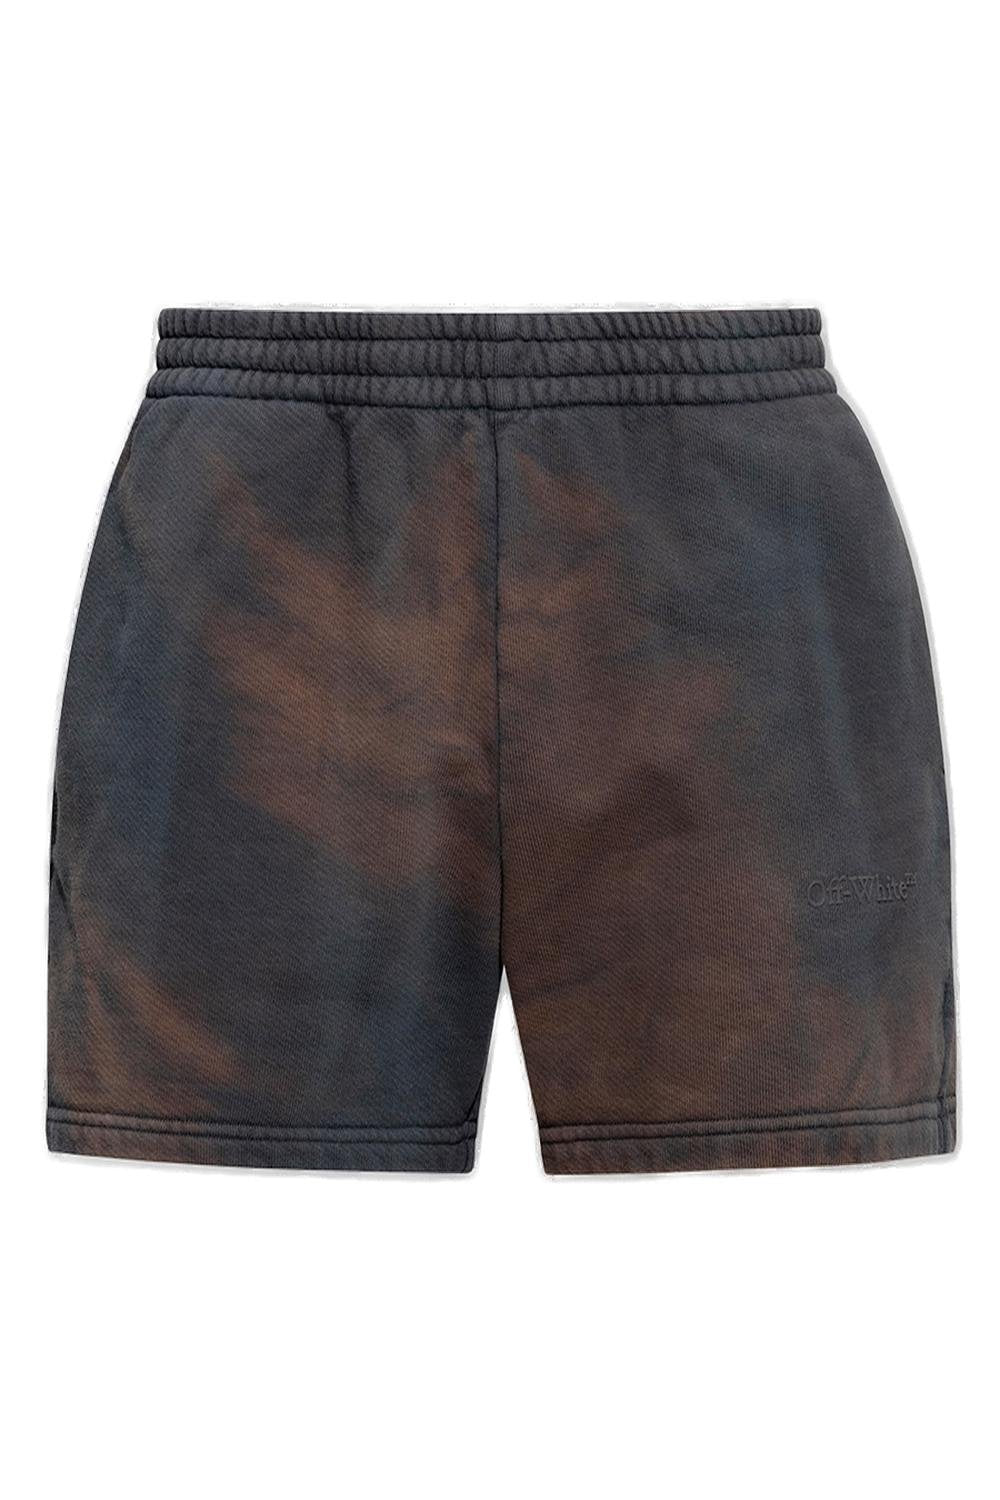 Off-White Tie-Dyed Elasticated Waistband Shorts